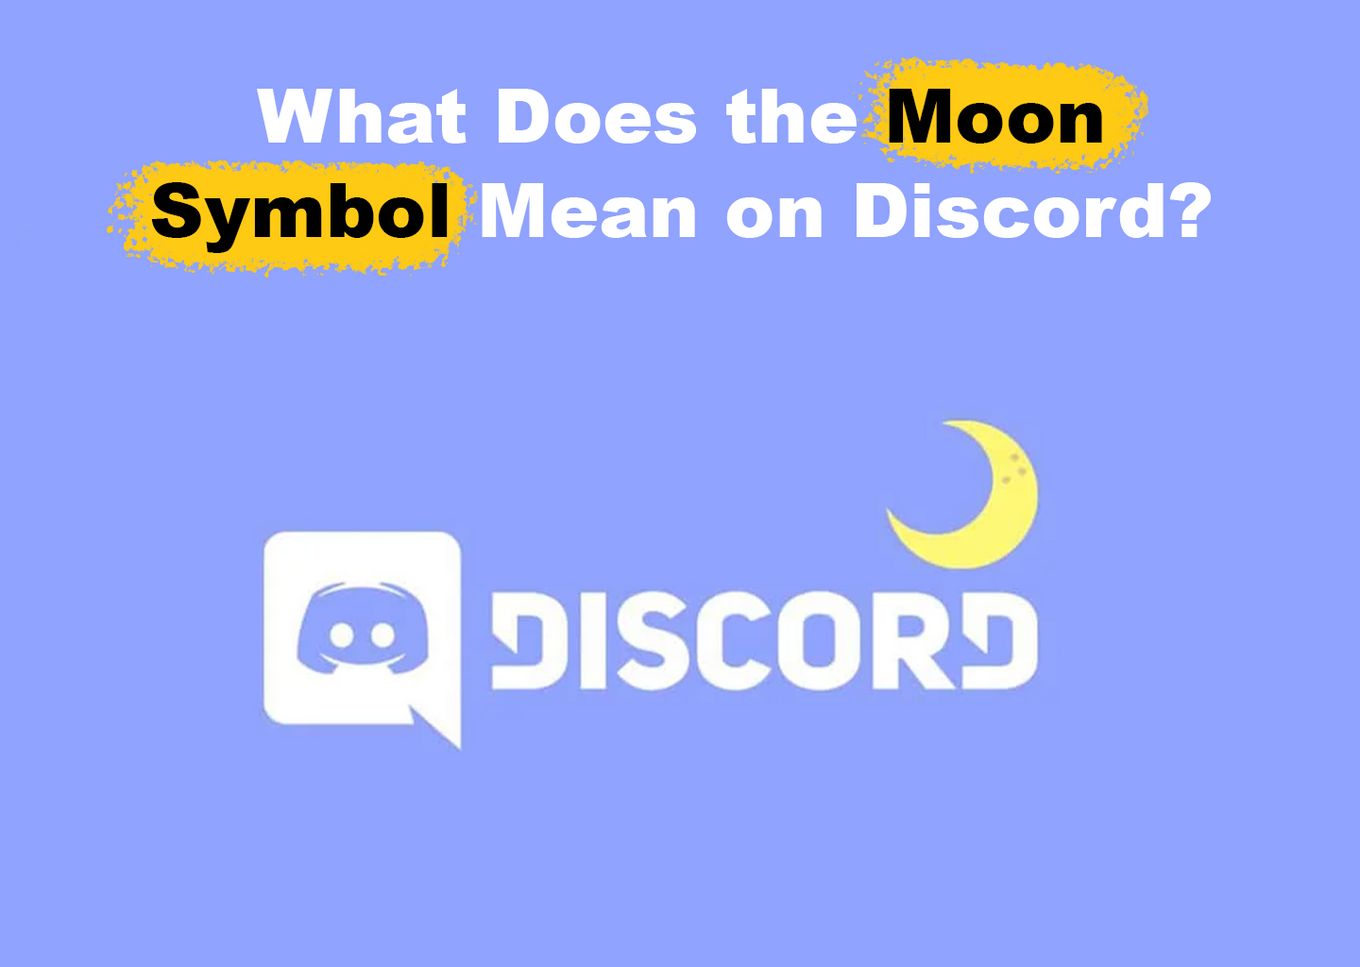 What Does the Moon mean on Discord